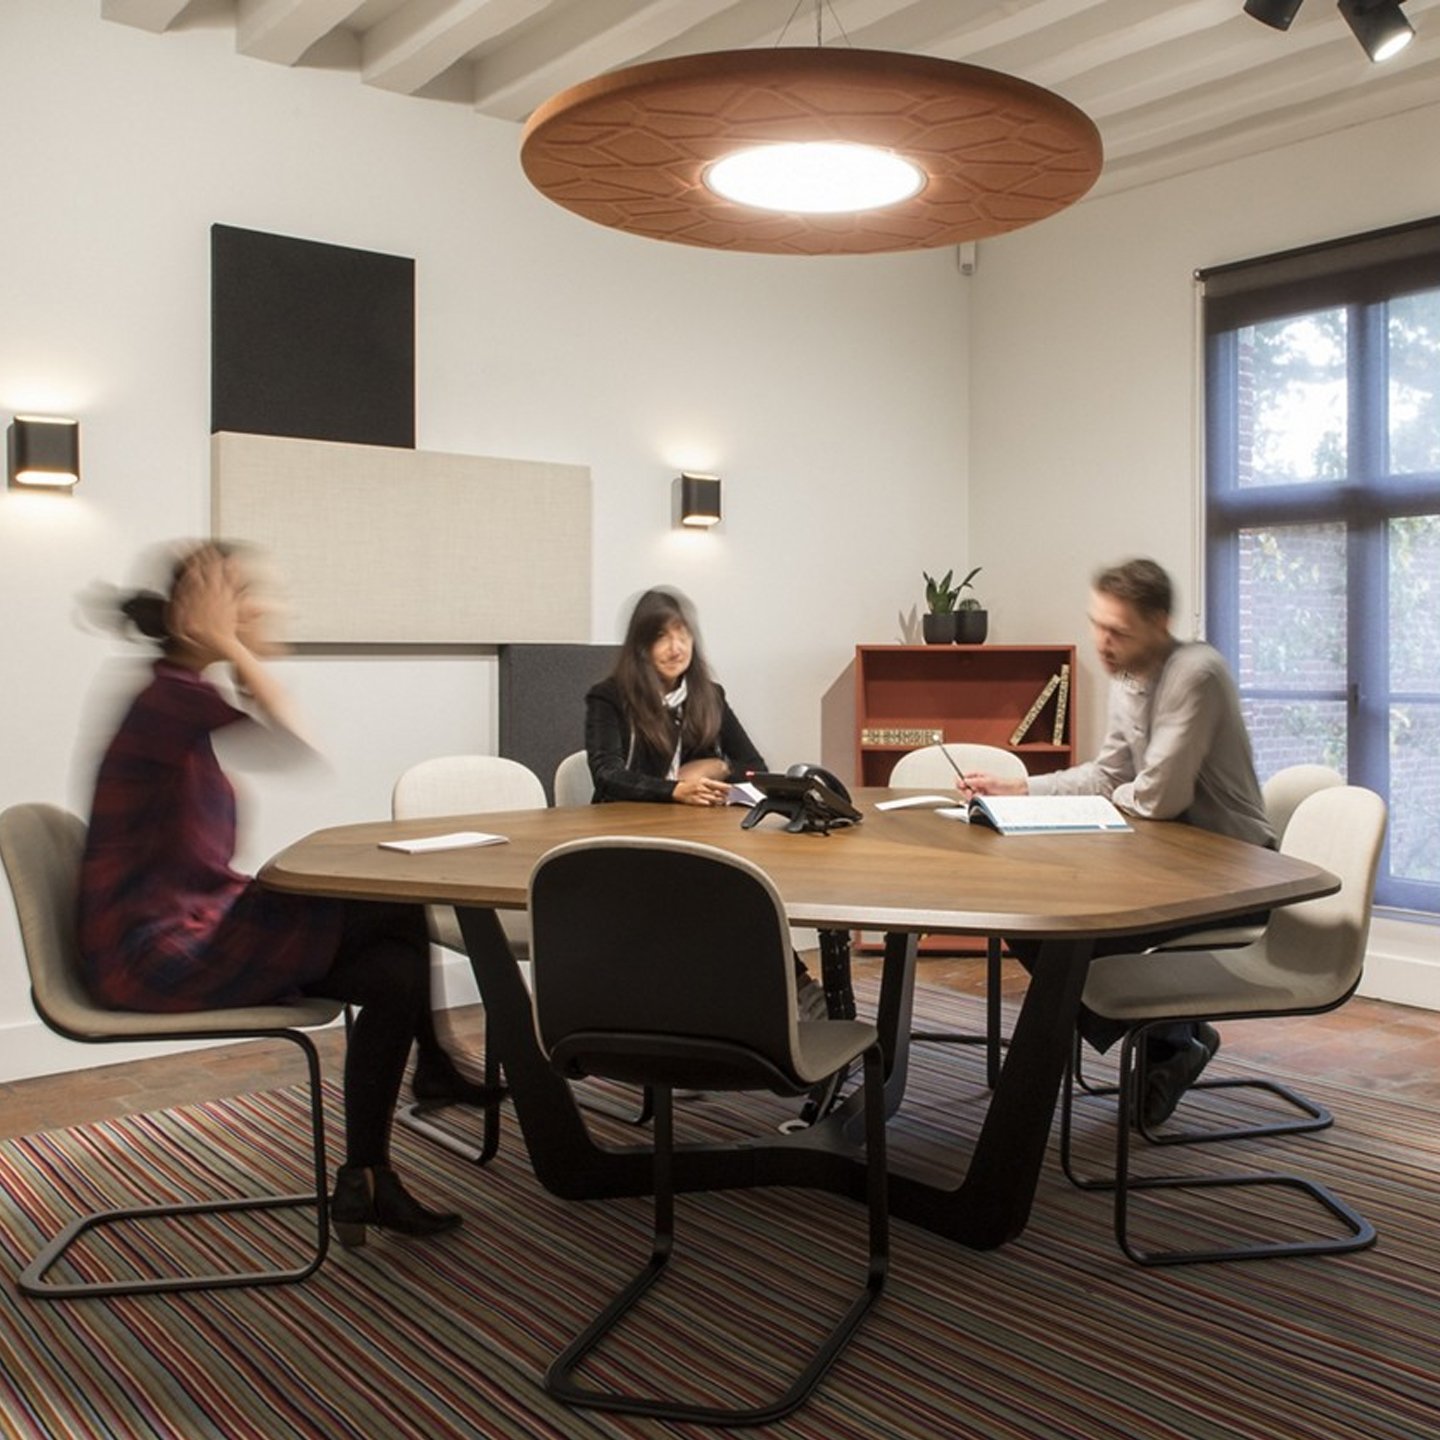 Haworth BuzziMoon Lighting in private collaboration room with employees working on oak desk and white chairs